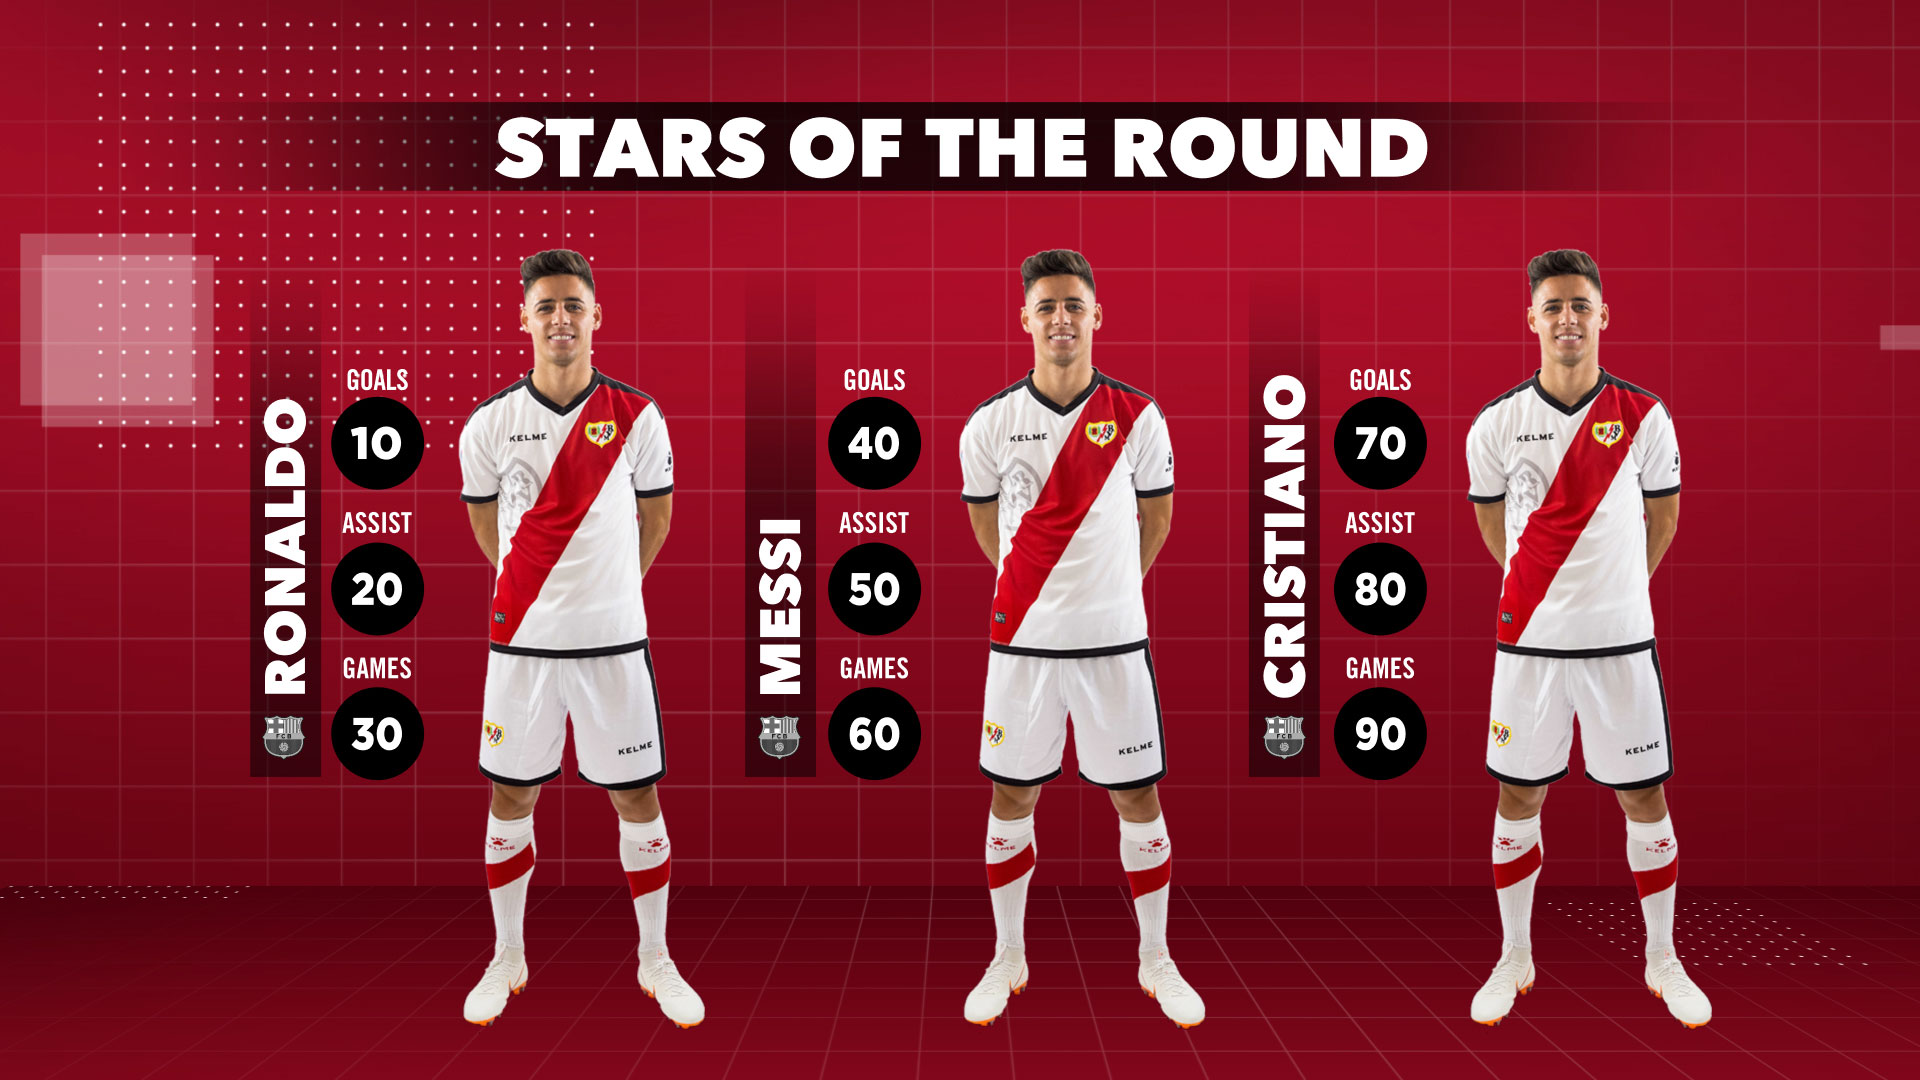 Imparables: Stars of the Round